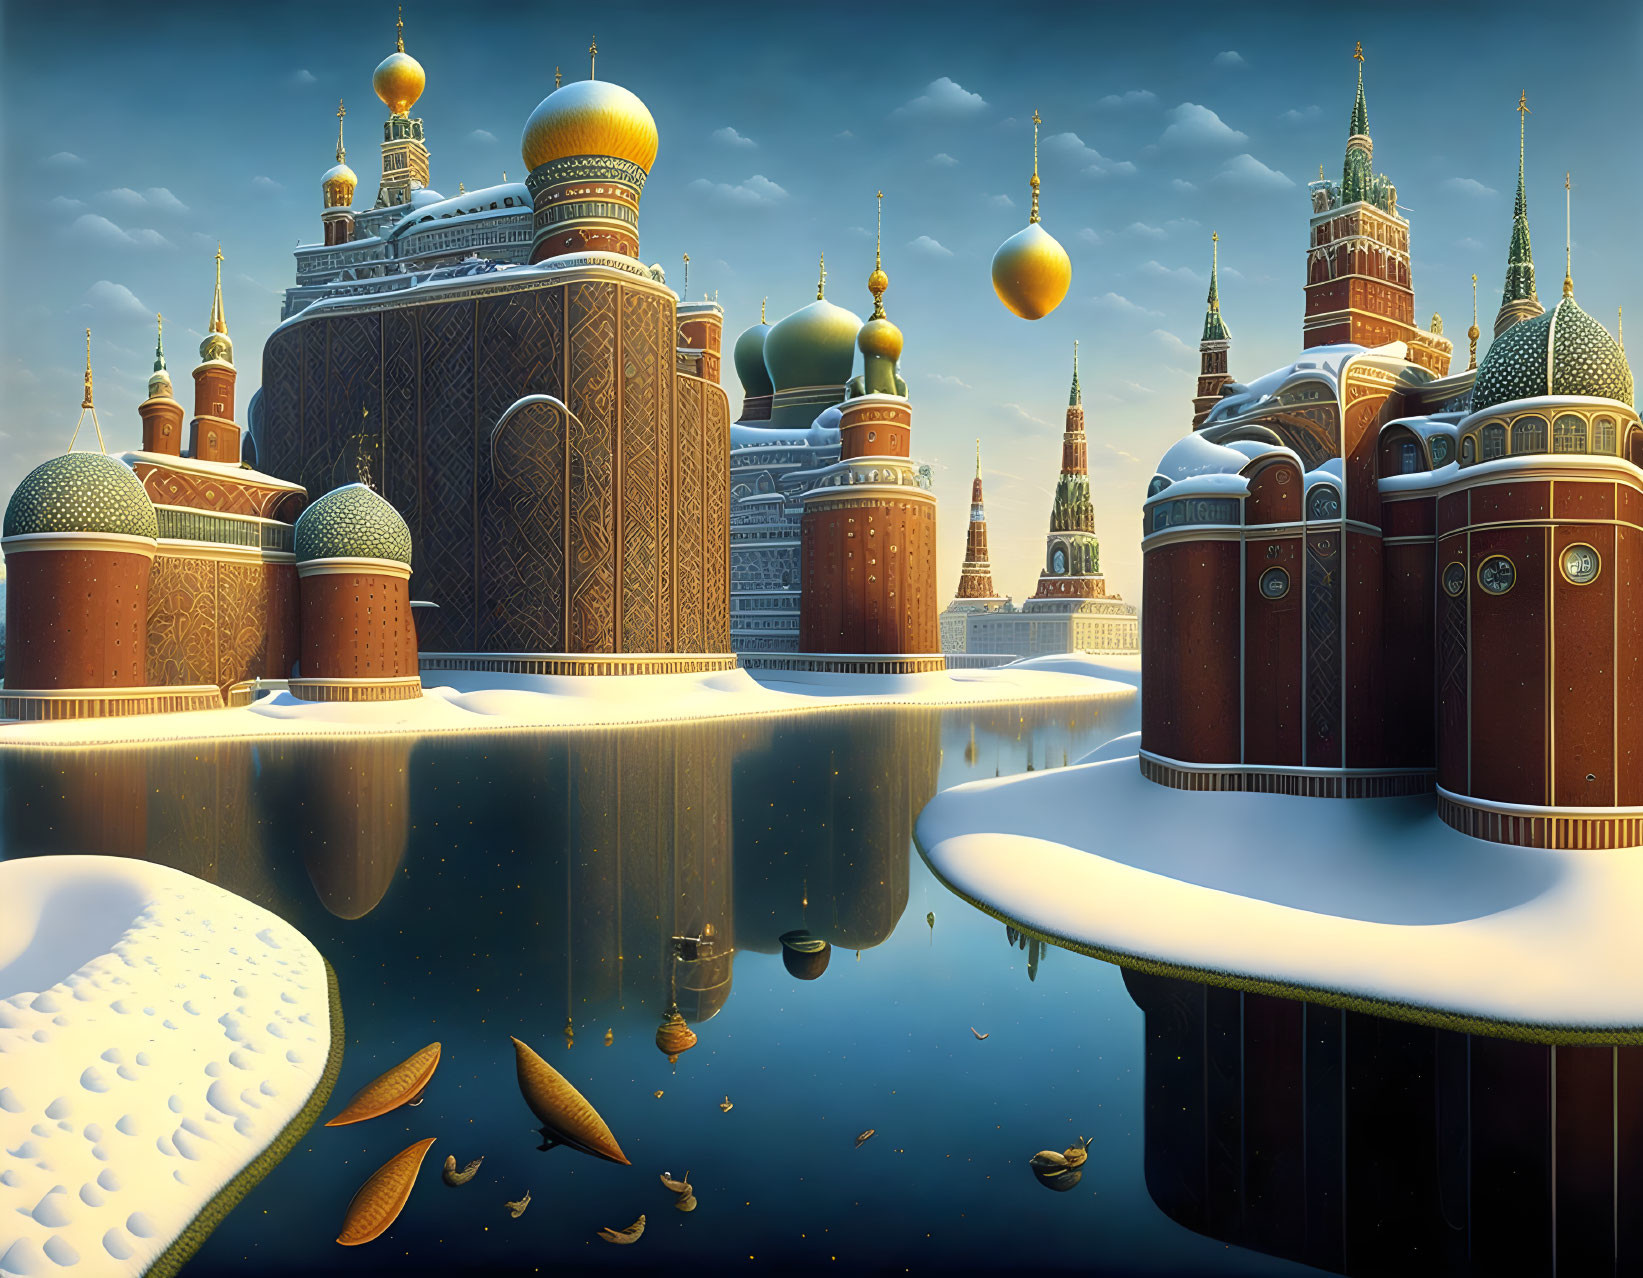 Russian architecture meets surreal elements in winter cityscape.